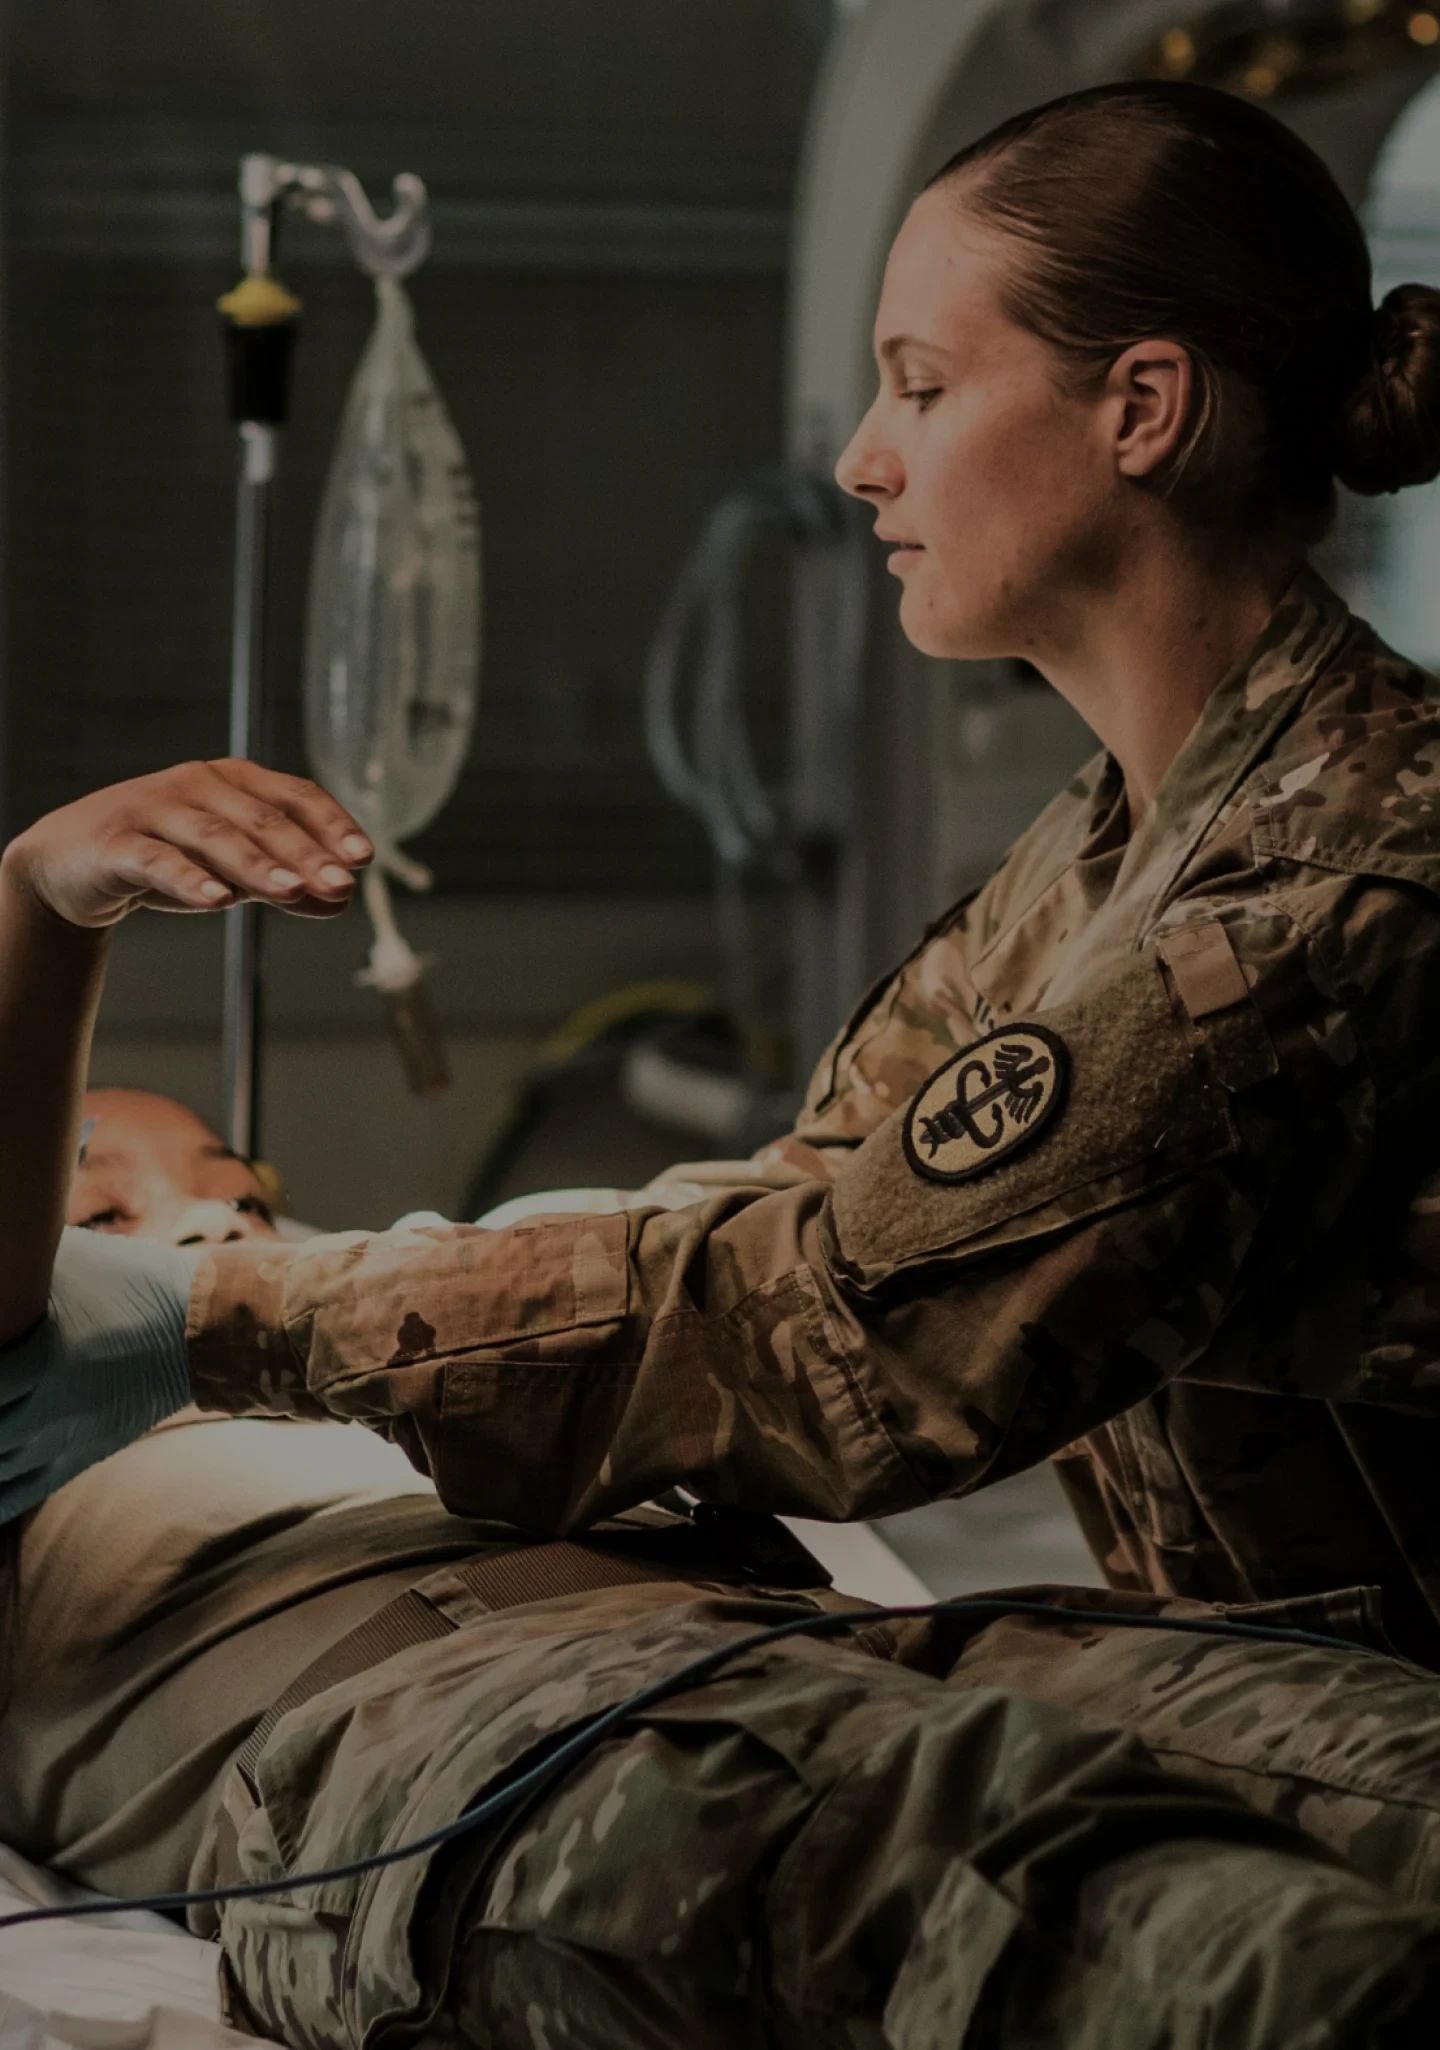 An Army healthcare worker treating a patient